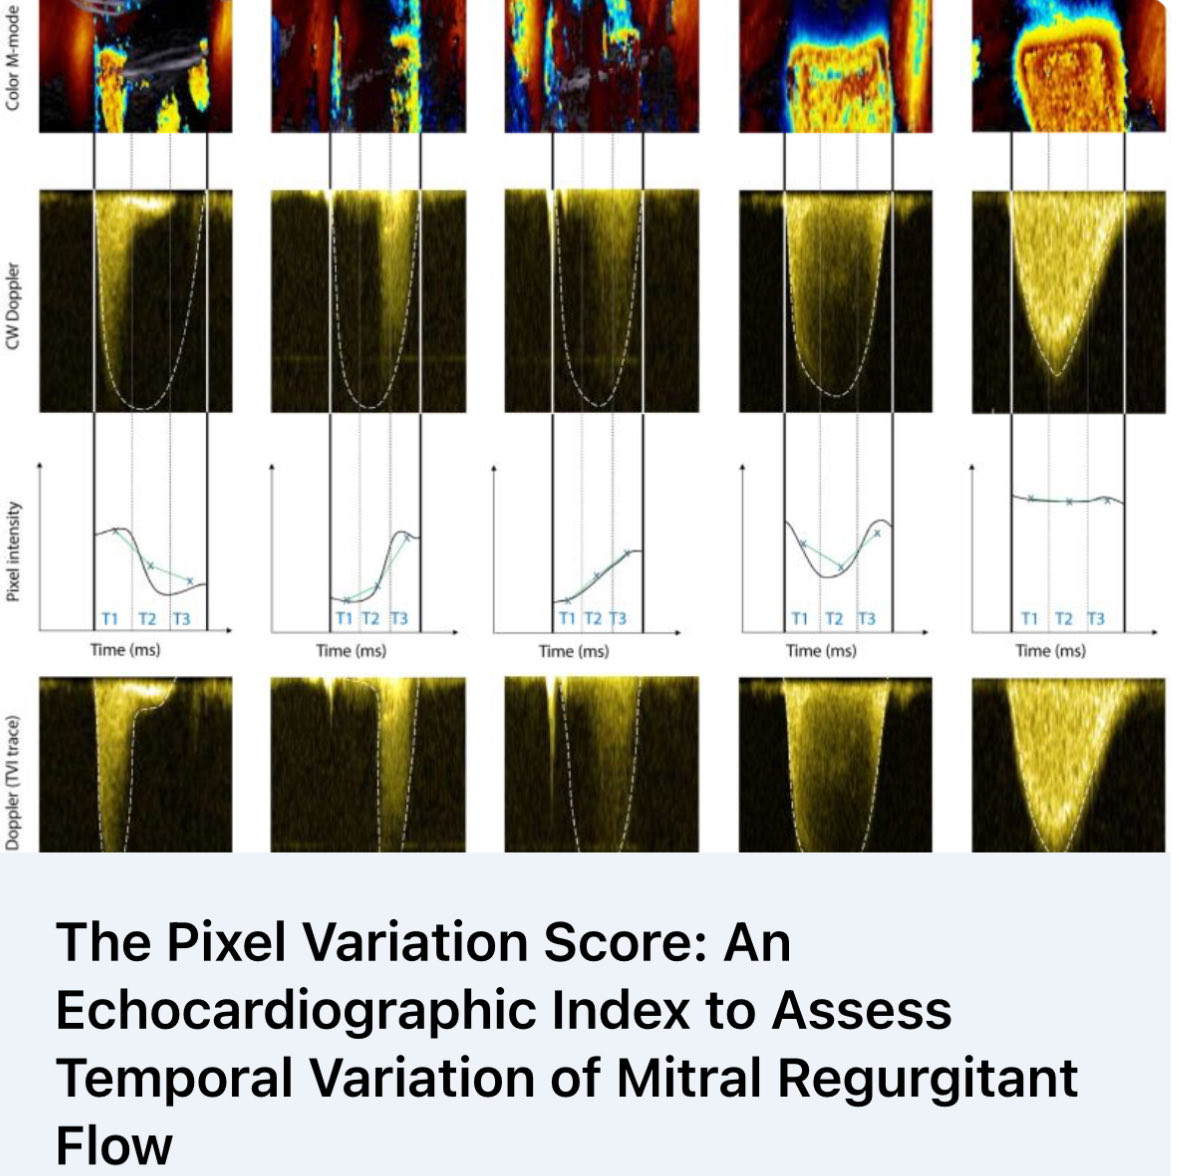 In mitral regurgitation, temporal variation of MR flow has been considered an important reason for inaccurate MR grading.